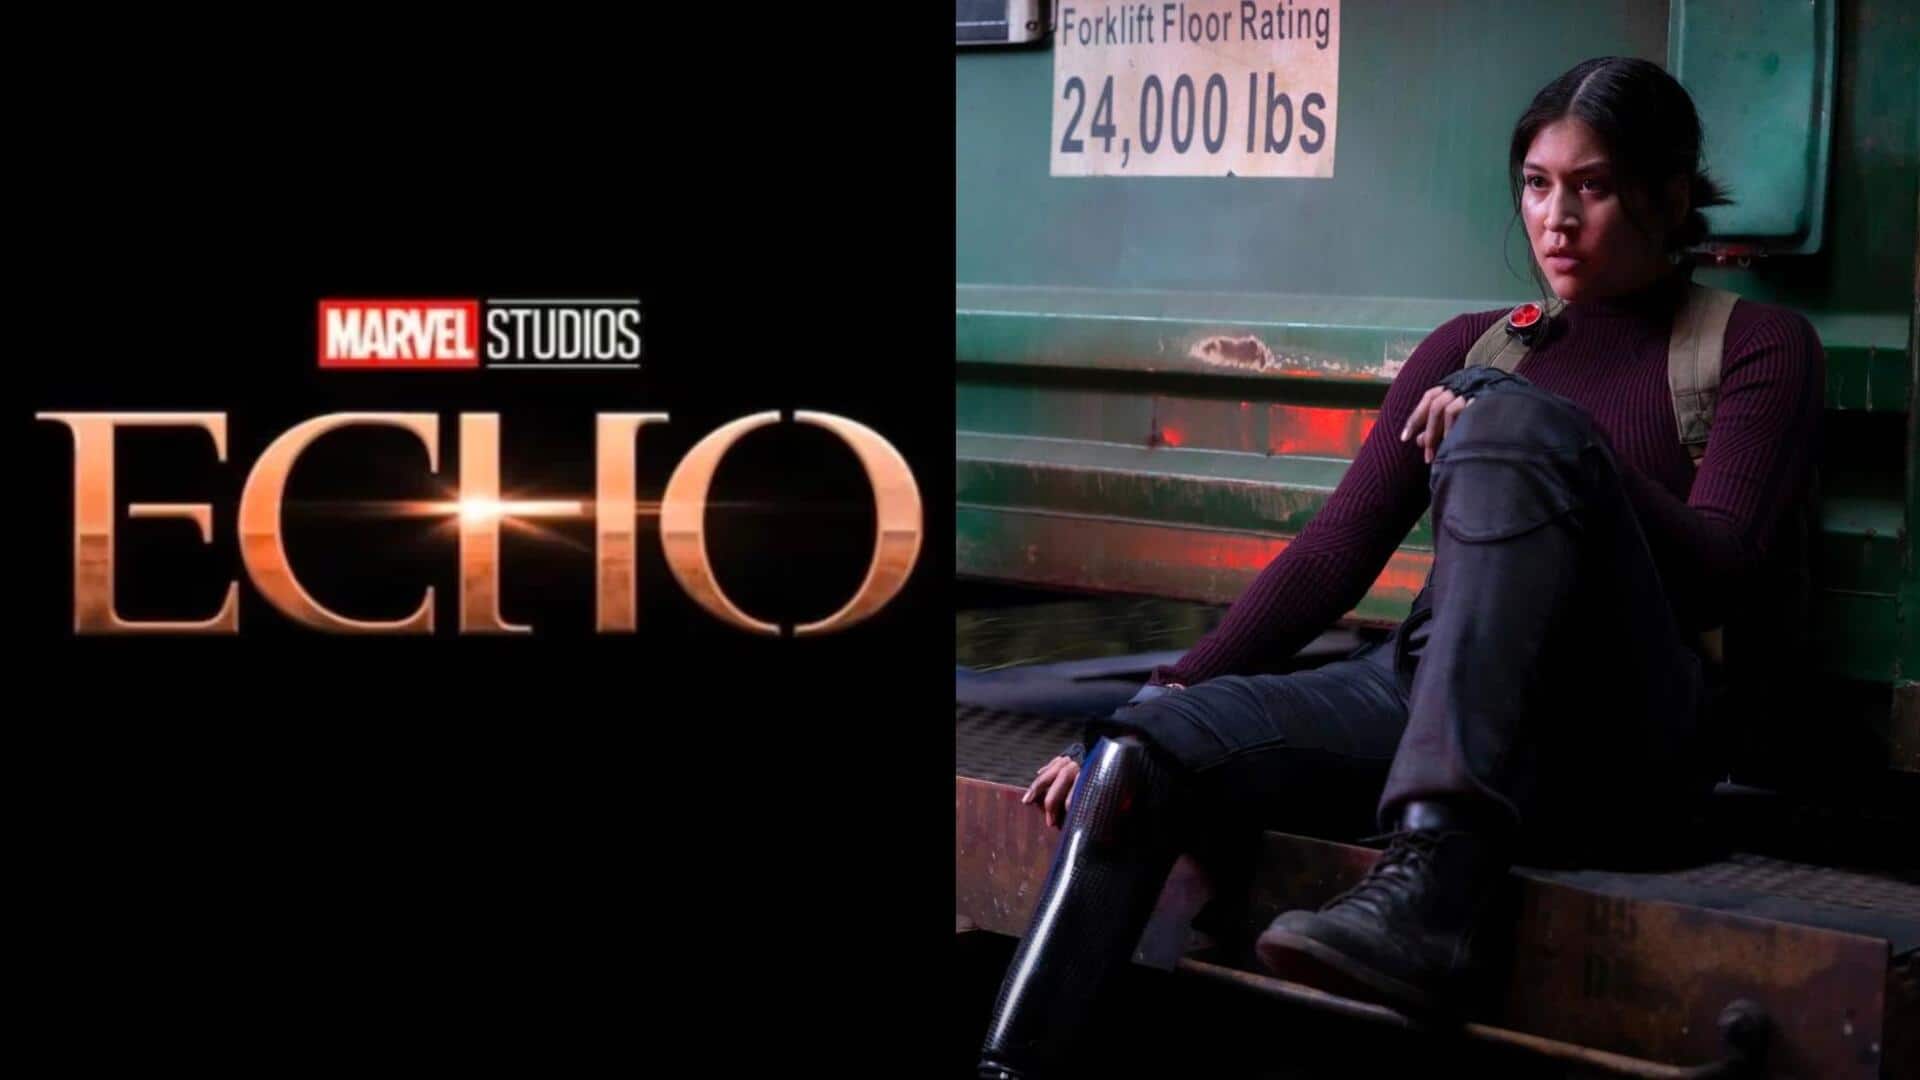 Marvel drops 'Echo' trailer: What to expect from spinoff show